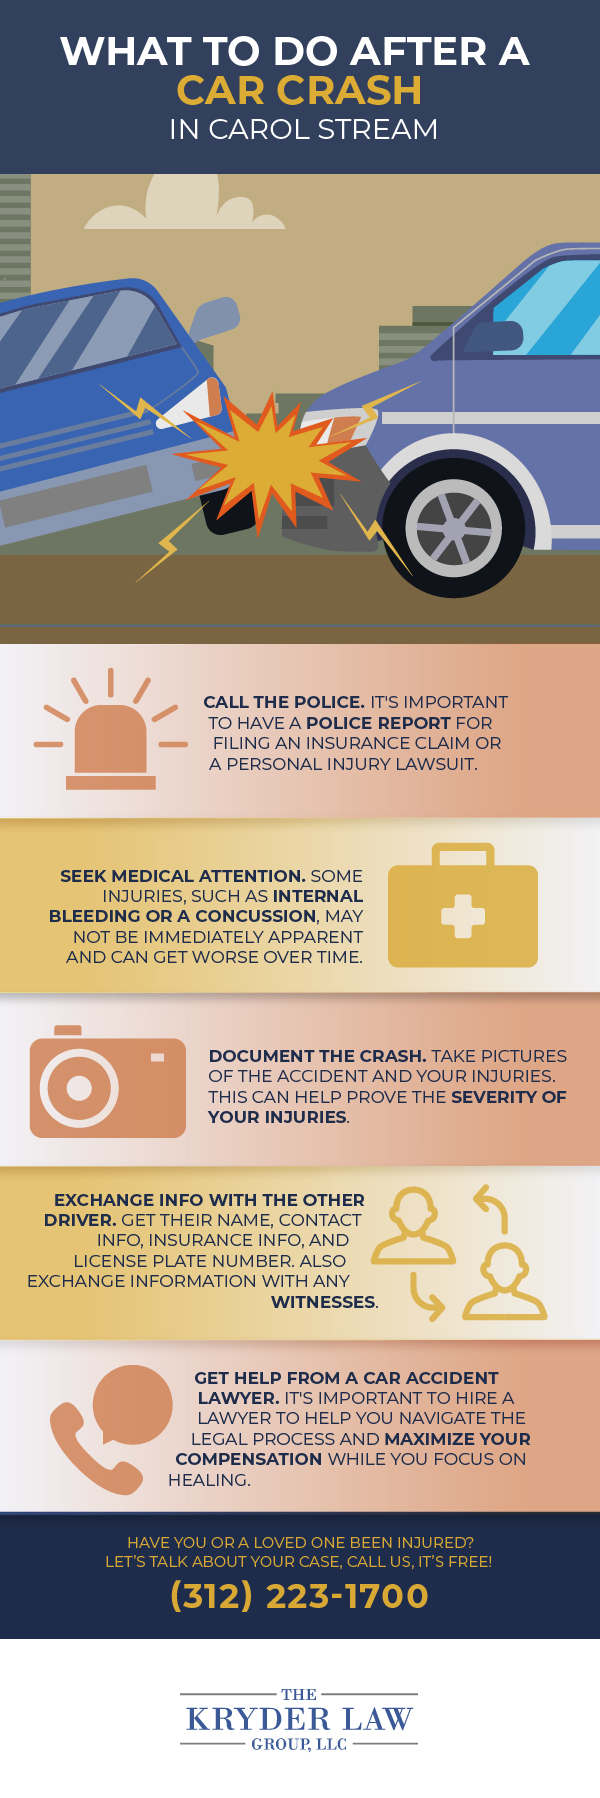 The Benefits of Hiring a Carol Stream Car Accident Lawyer Infographic)